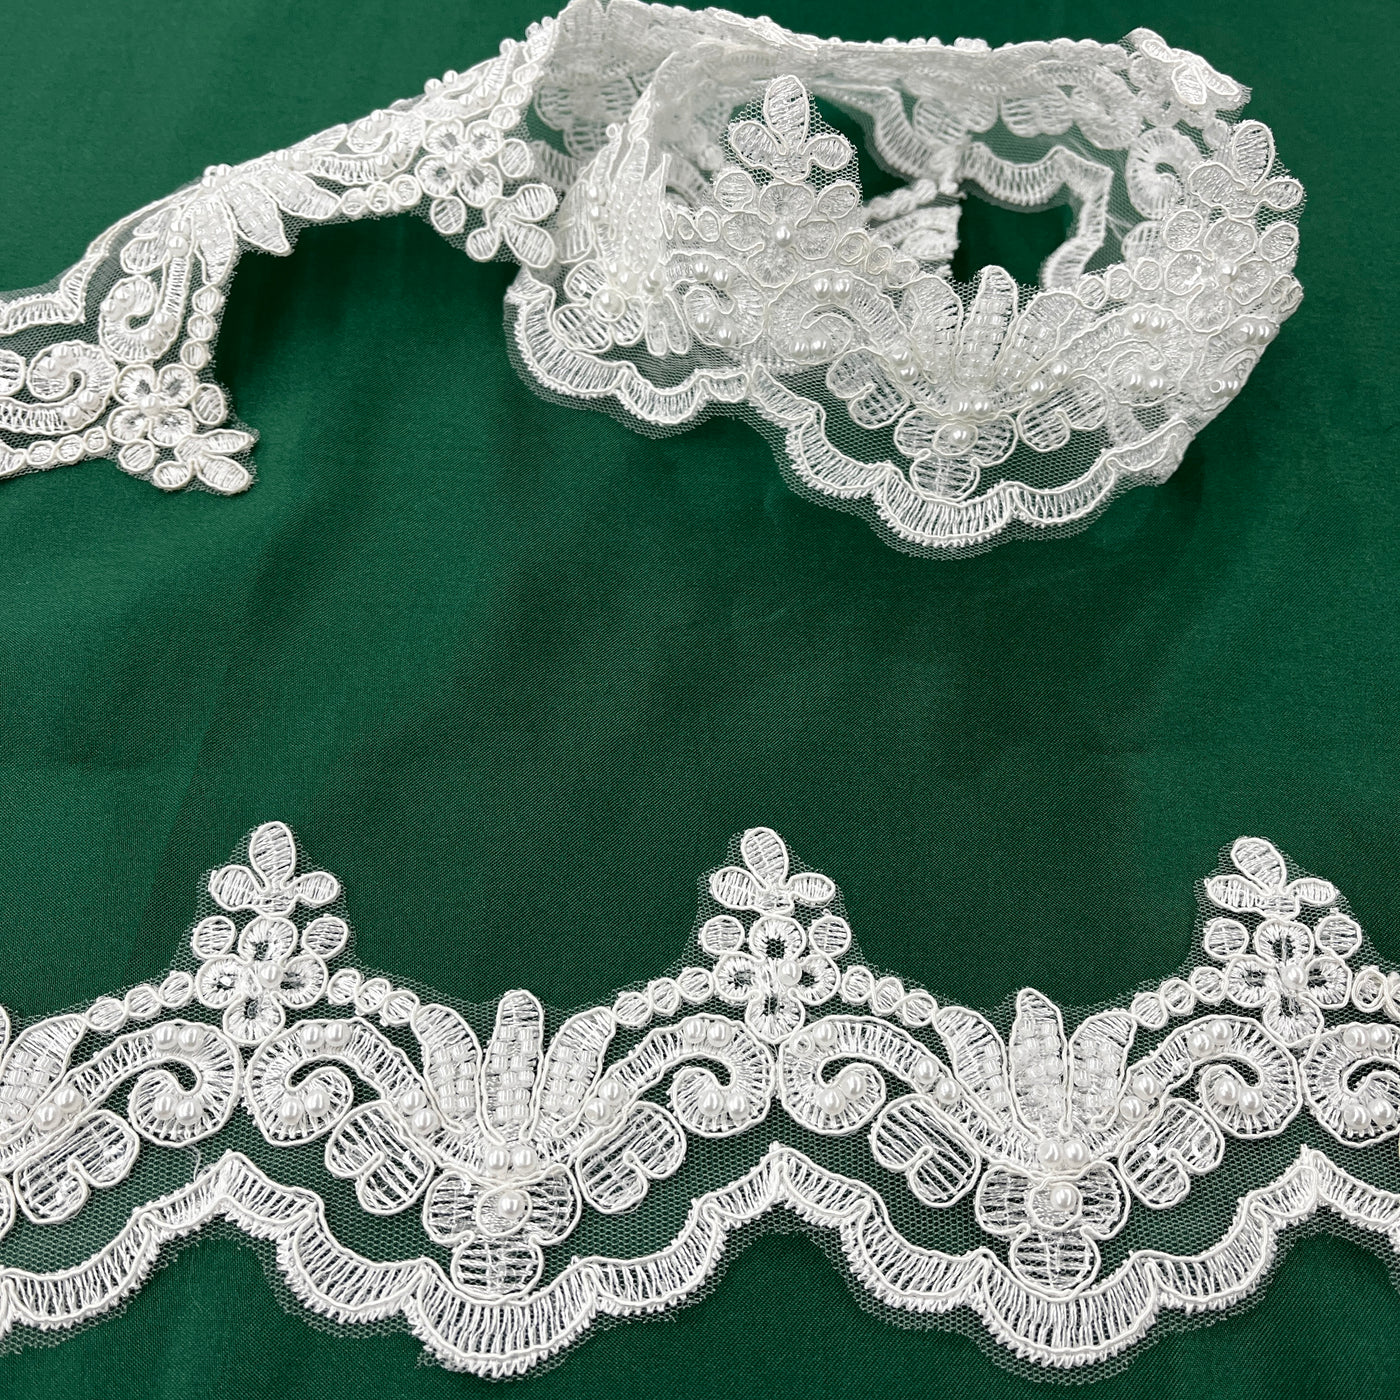 Beaded & Corded Lace Trimming Embroidered on 100% Polyester Net Mesh | Lace USA - KZ-34W-HB/Pearl